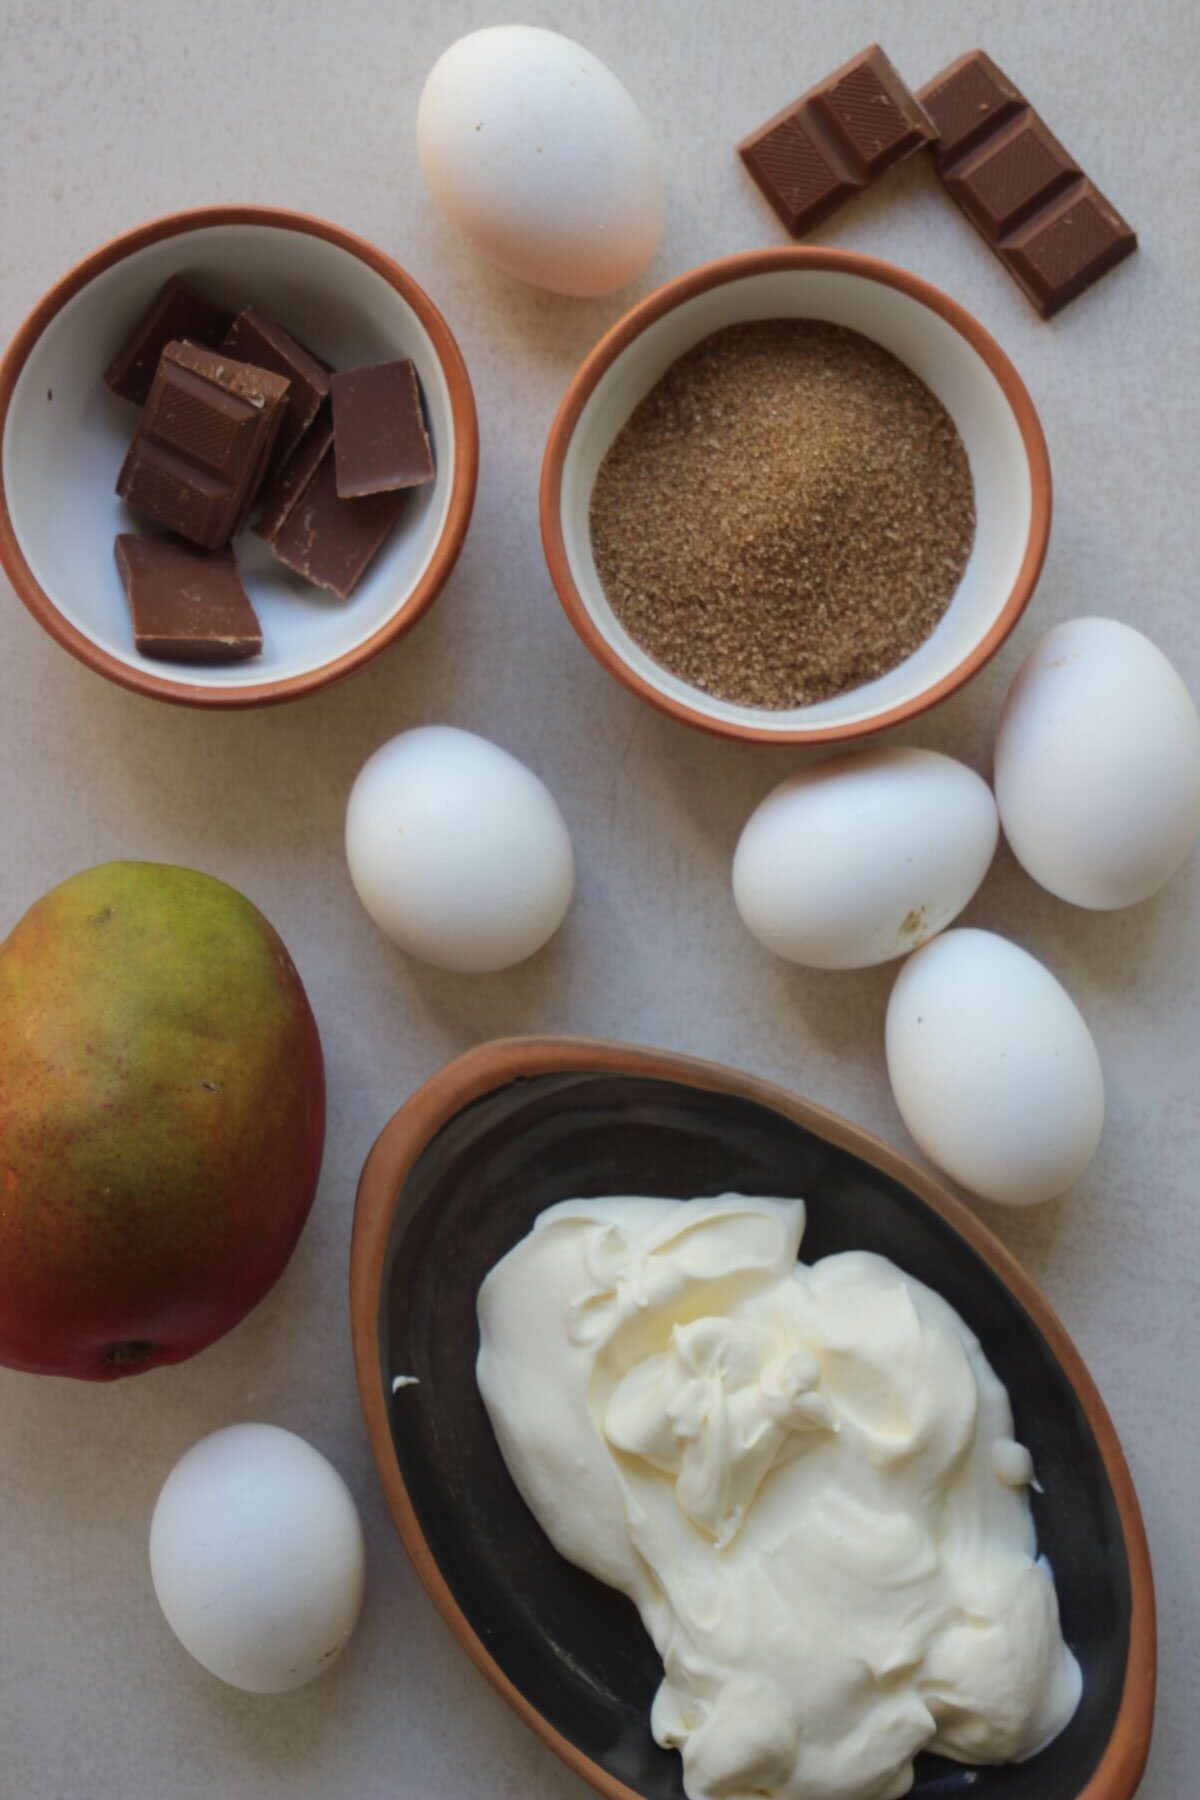 Chocolate mousse and mango compote ingredients seen from above.